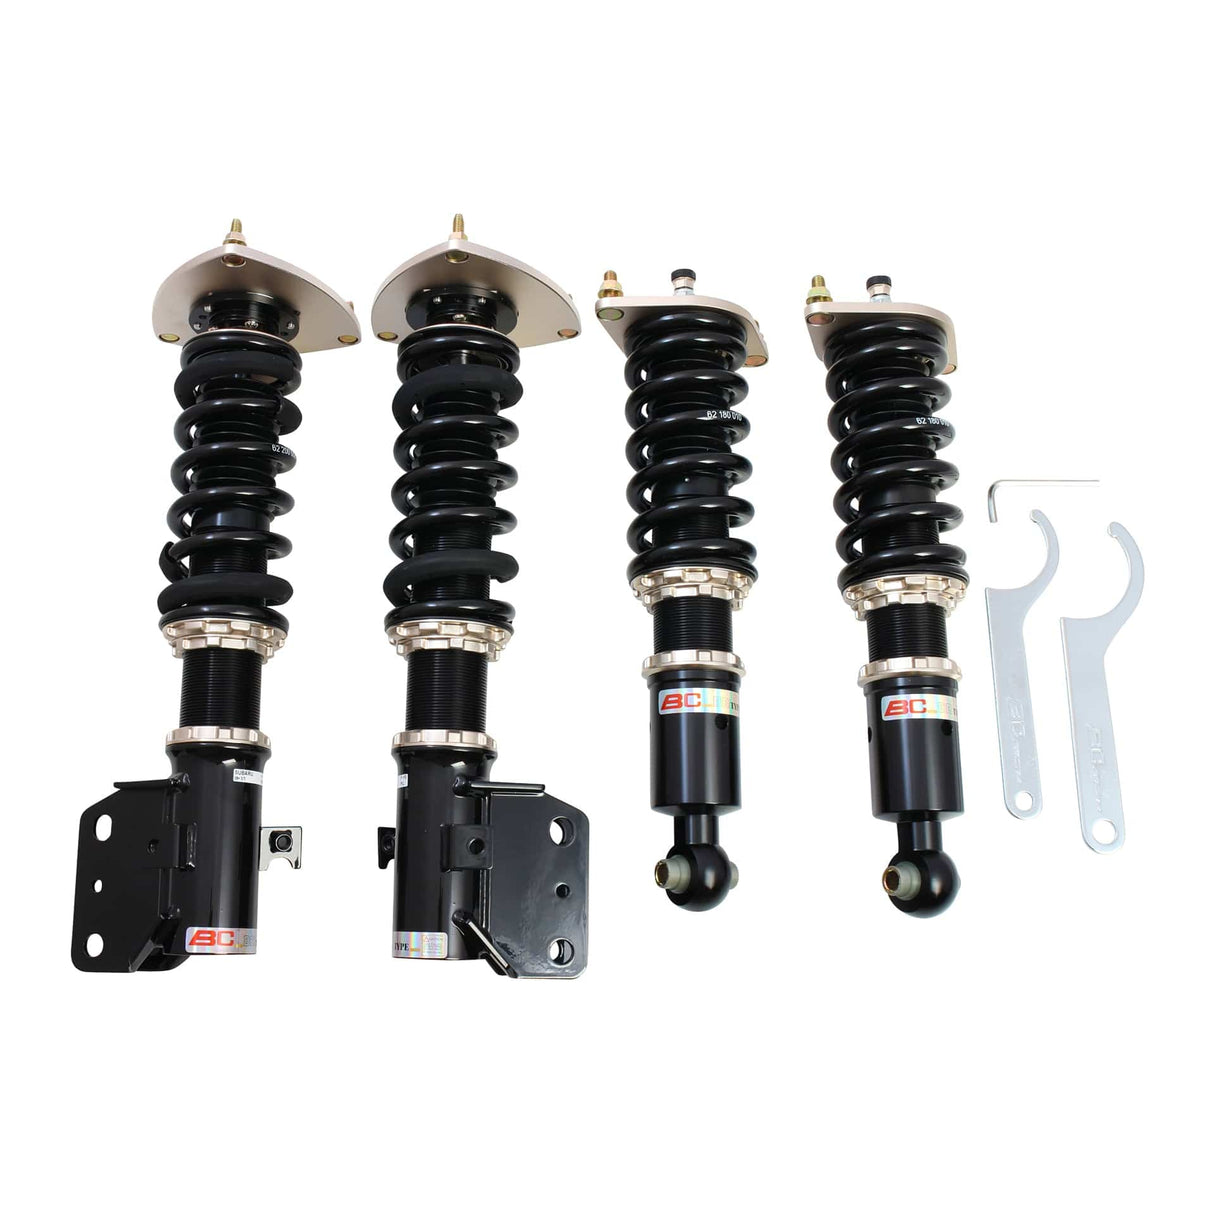 BC Racing BR Series Coilovers for 2008-2014 Subaru WRX STI Hatchback (GRB)